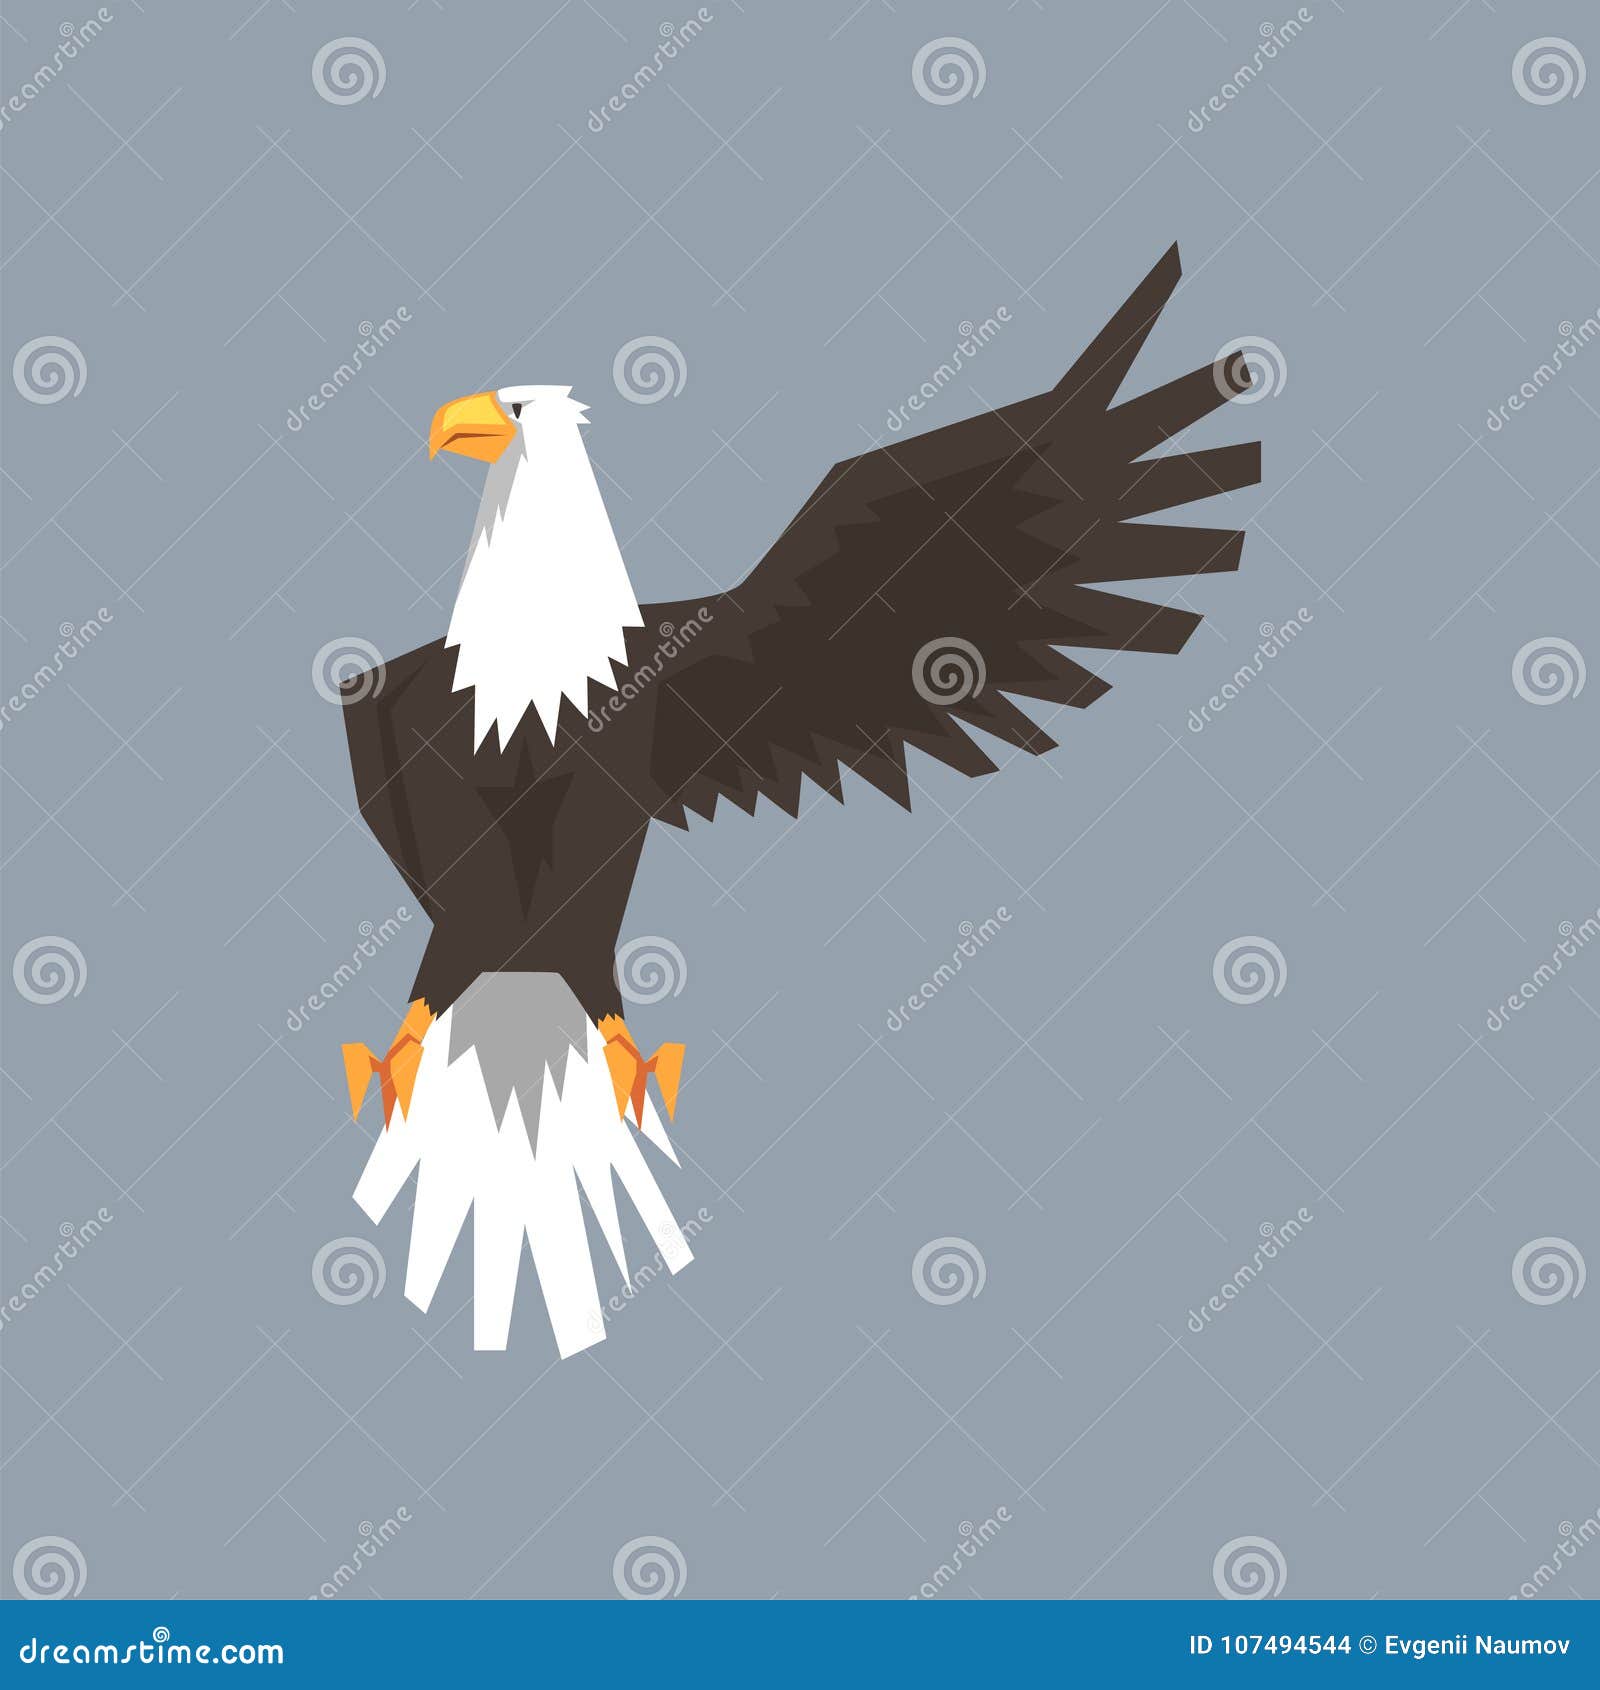 North American Bald Eagle Character Raising One Wing, Symbol of Freedom and  Independence Vector Illustration Stock Vector - Illustration of claw, bald:  107494544